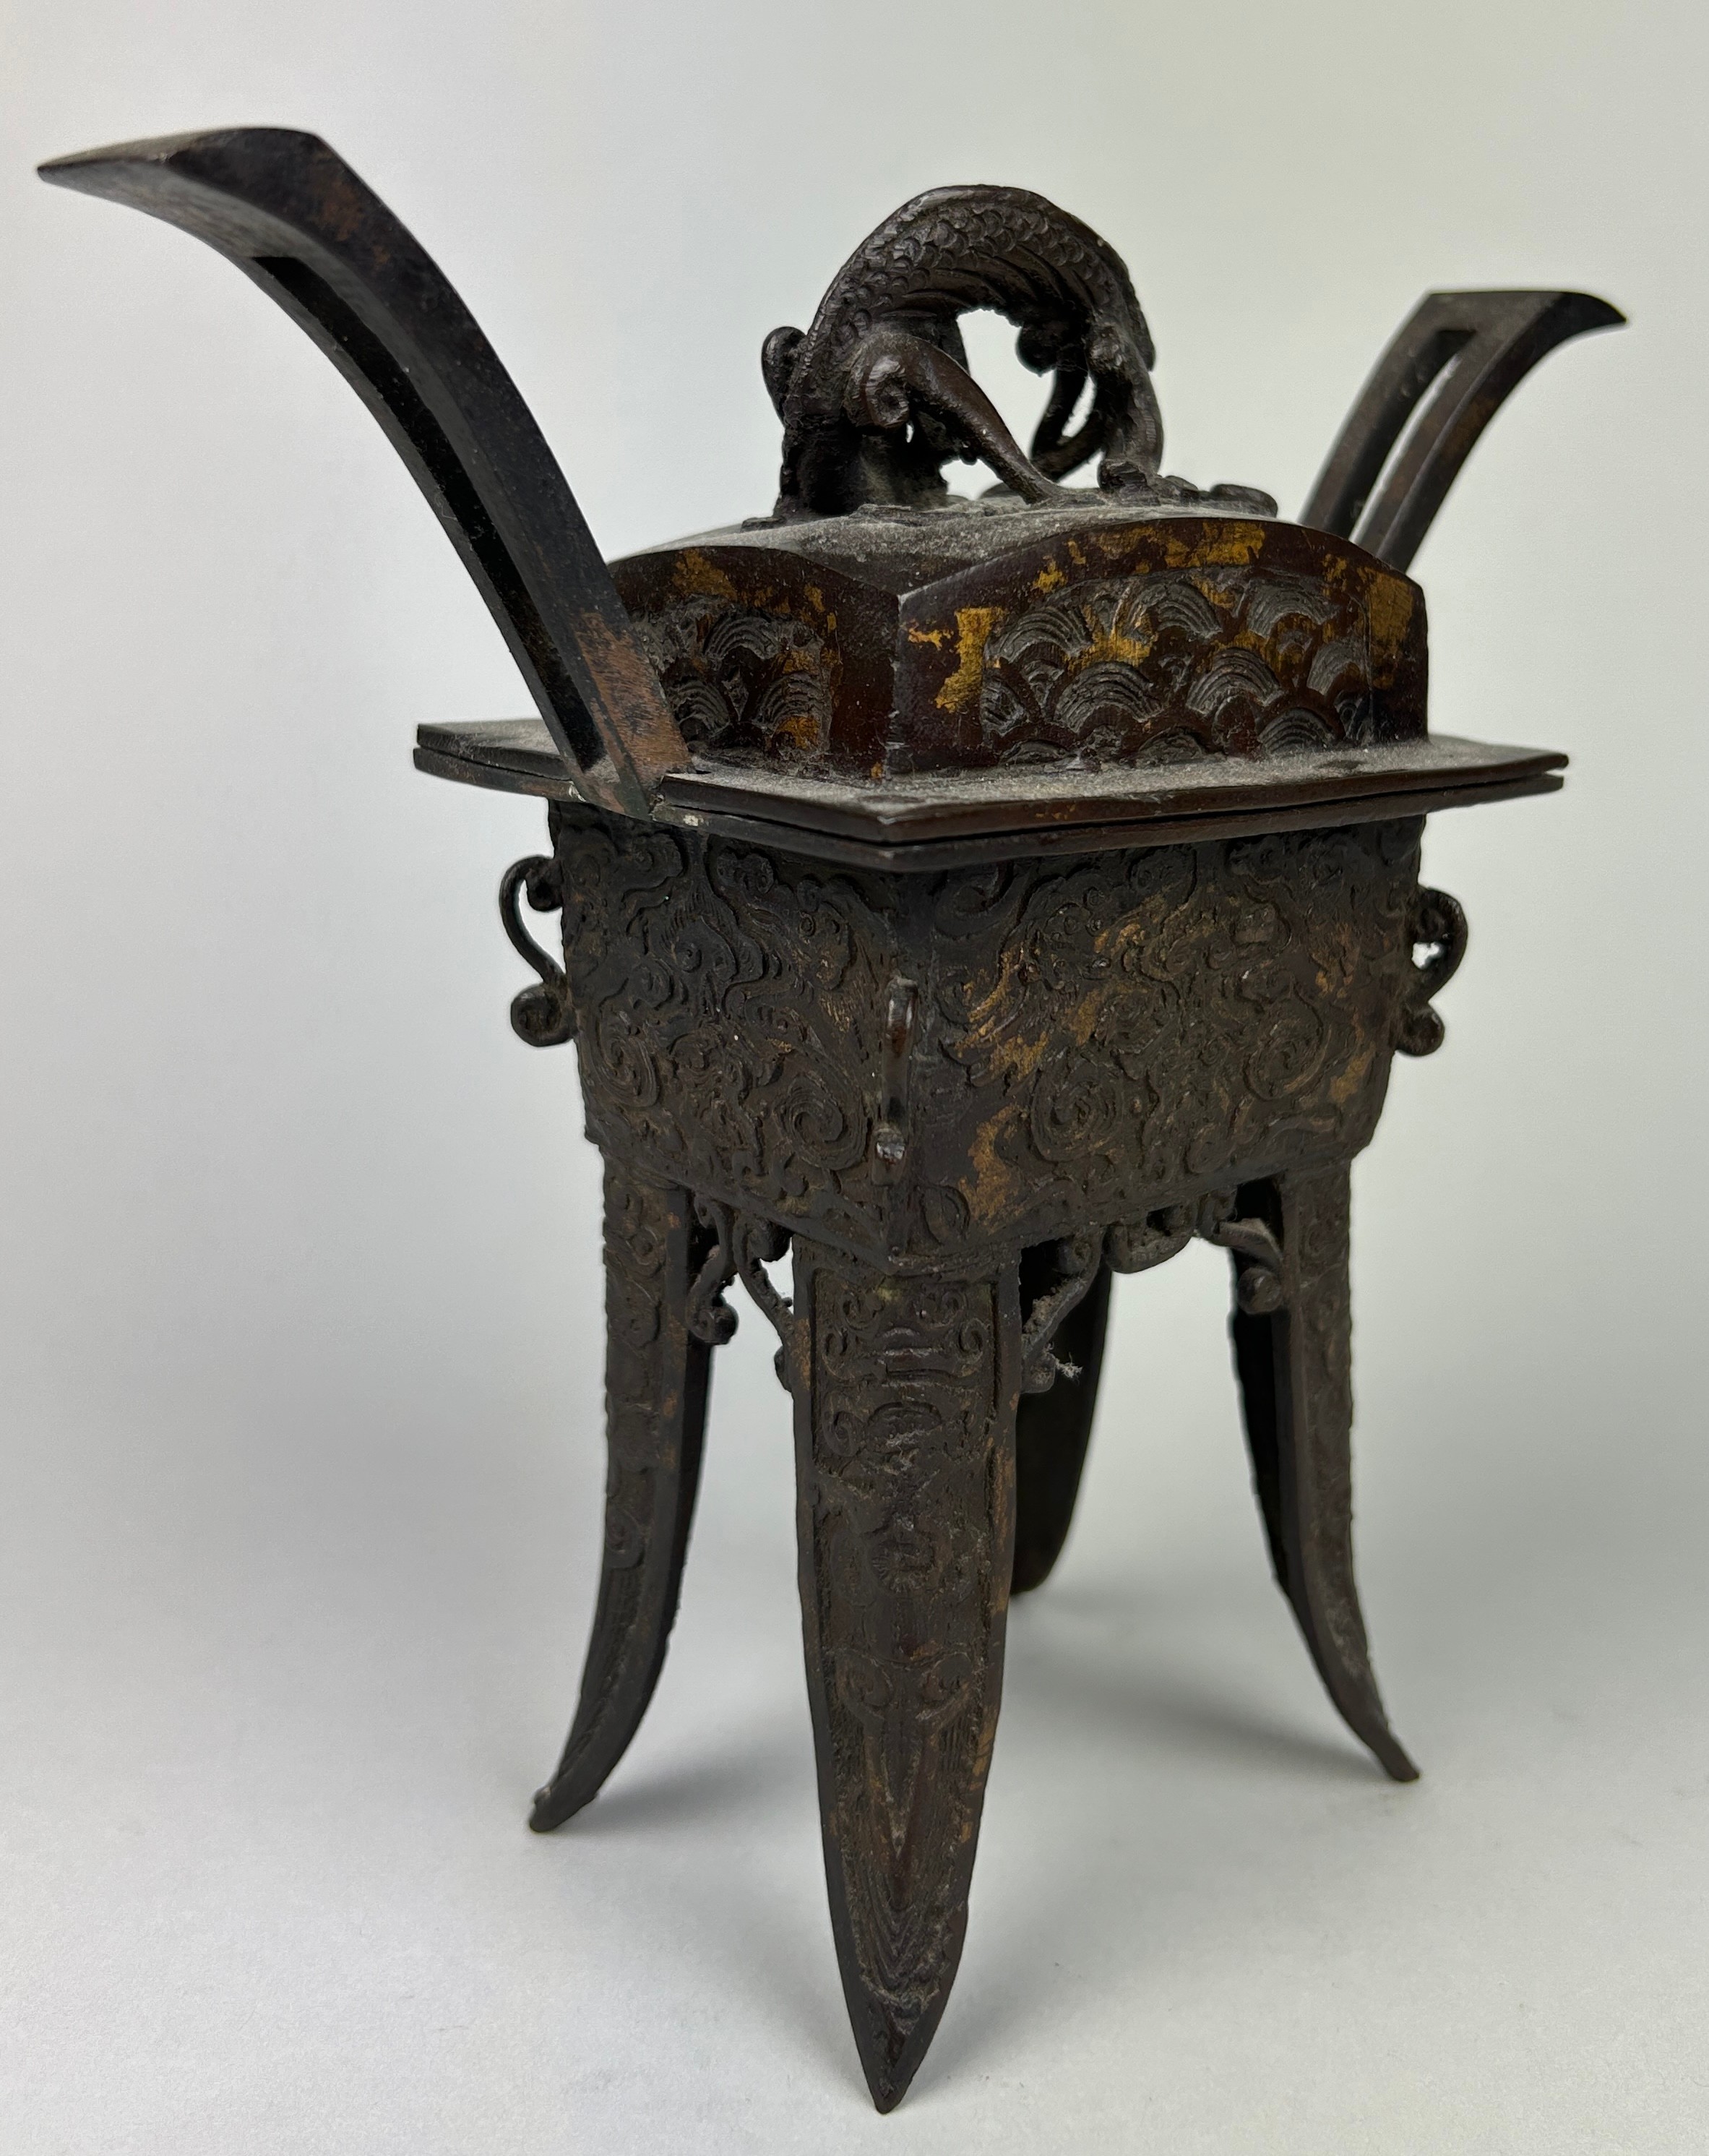 A LATE 19TH CENTURY BRONZE CENSER OF ARCHAIC JUE FORM, Four character mark underneath. 18cm x 18cm - Image 4 of 6